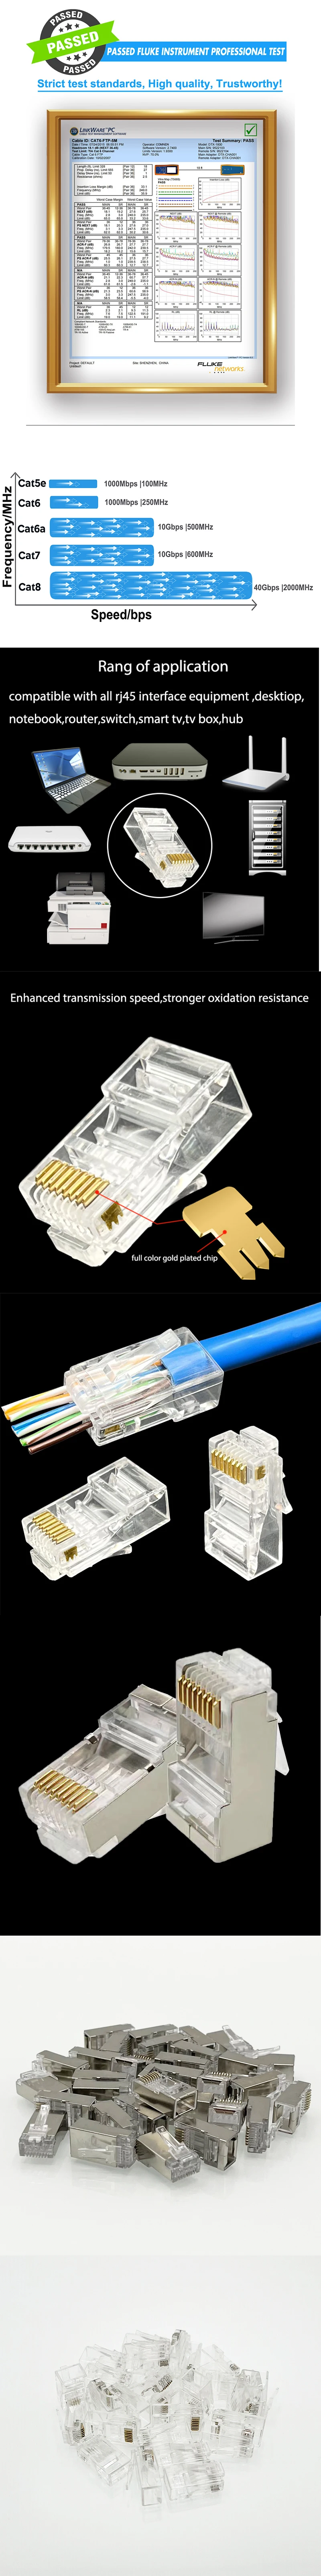 S21958c3658cf4c139dd42c88ab202b28Y COMNEN Cat6/6A Rj45 Connector Passthrough Modular Plug Computer Network UTP/FTP Gold-Plated 1.2/1.1mm Hole End Ethernet Cable